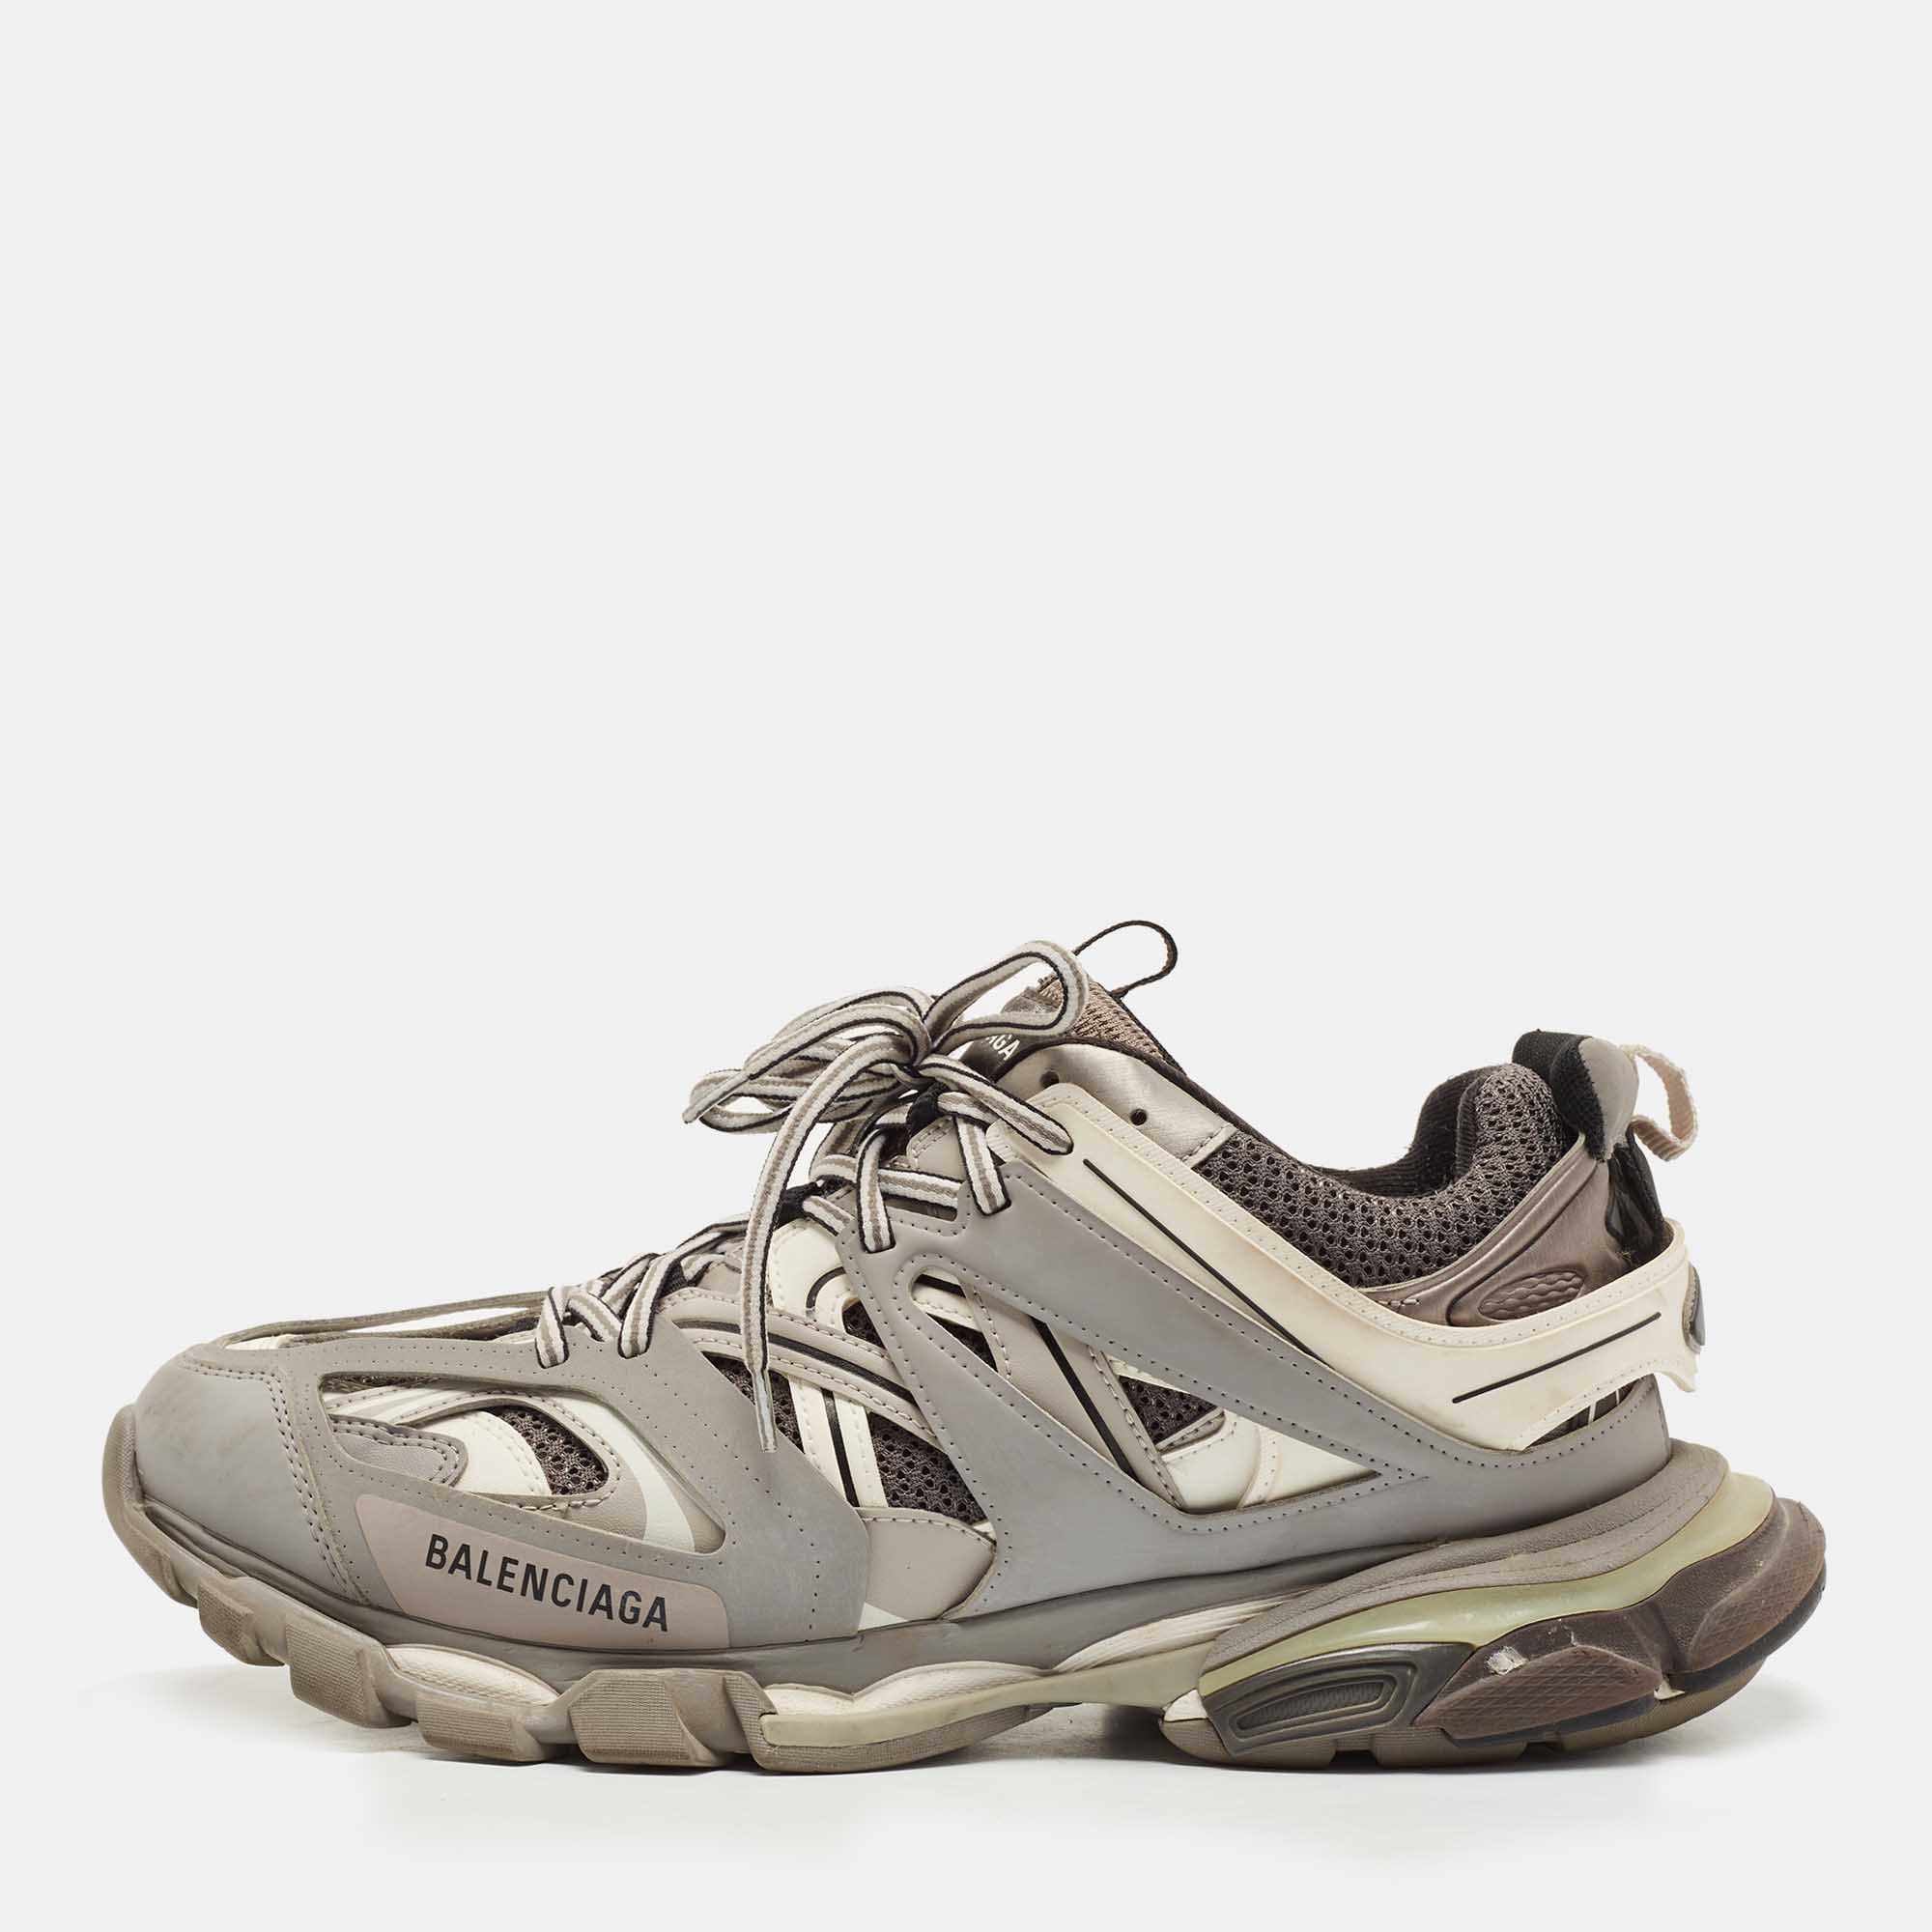 Balenciagas Track Sneaker Is Now Available in Cool Grey  Balenciaga  shoes Balenciaga track Trending shoes for men